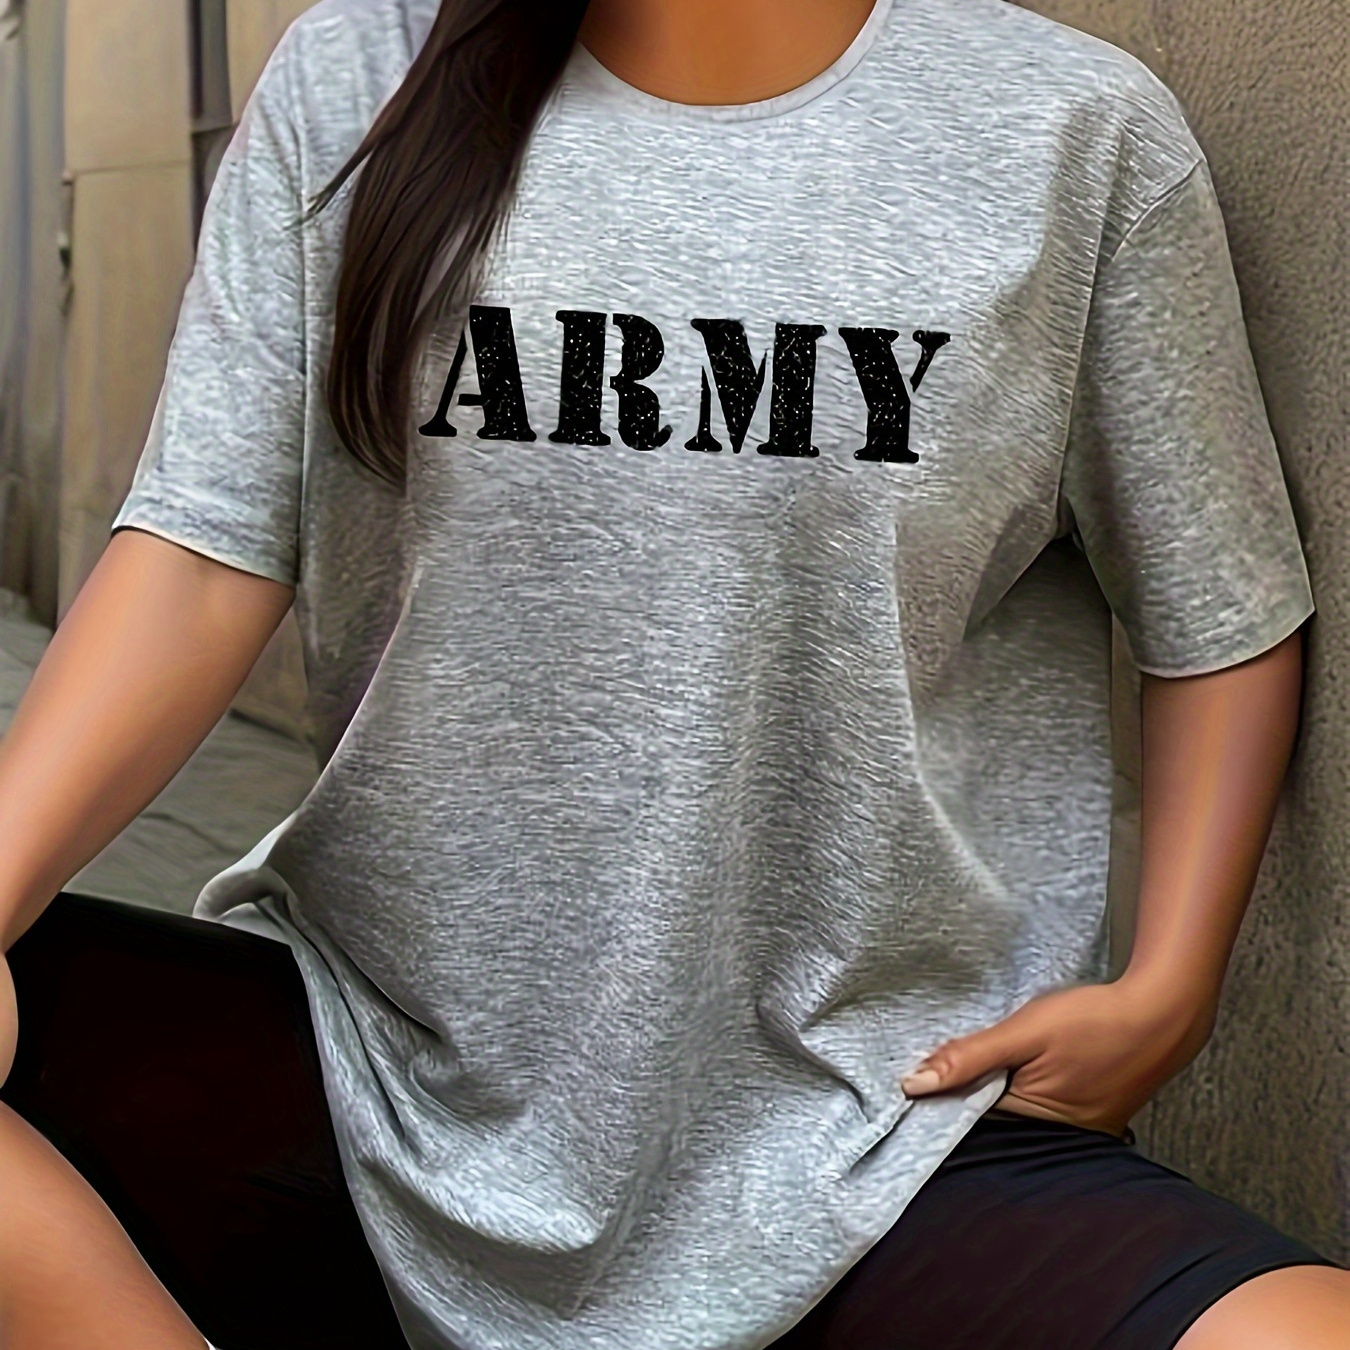 

Women's Plus Size Casual Sporty T-shirt, Army Letter Print, Independence Day Outfit 4th Of July Comfort Fit Short Sleeve Tee, Fashion Breathable Casual Top